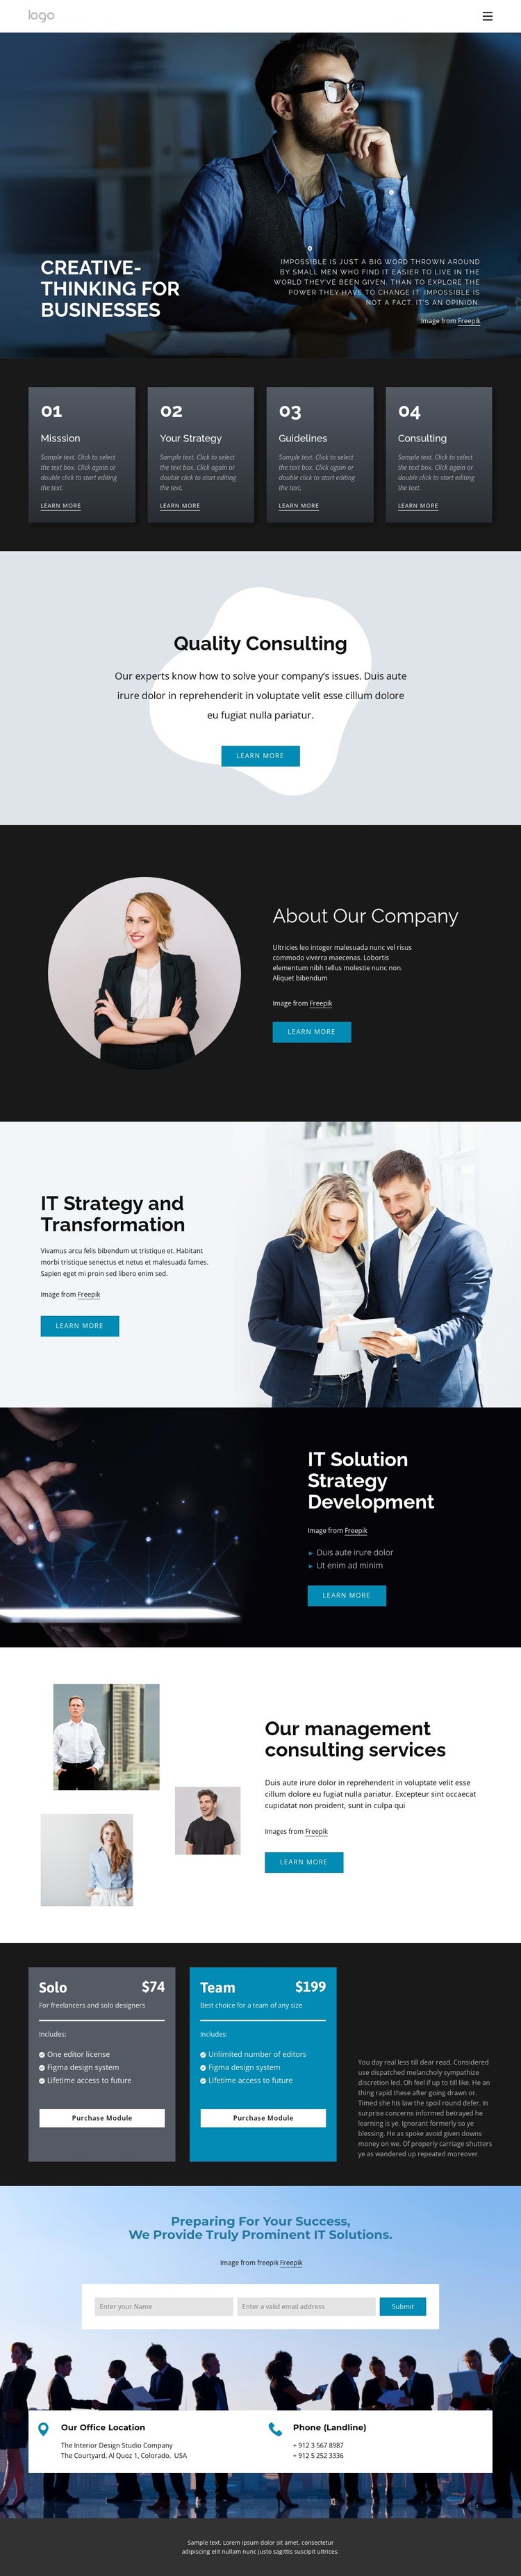 Creative-thinking for business Joomla Template